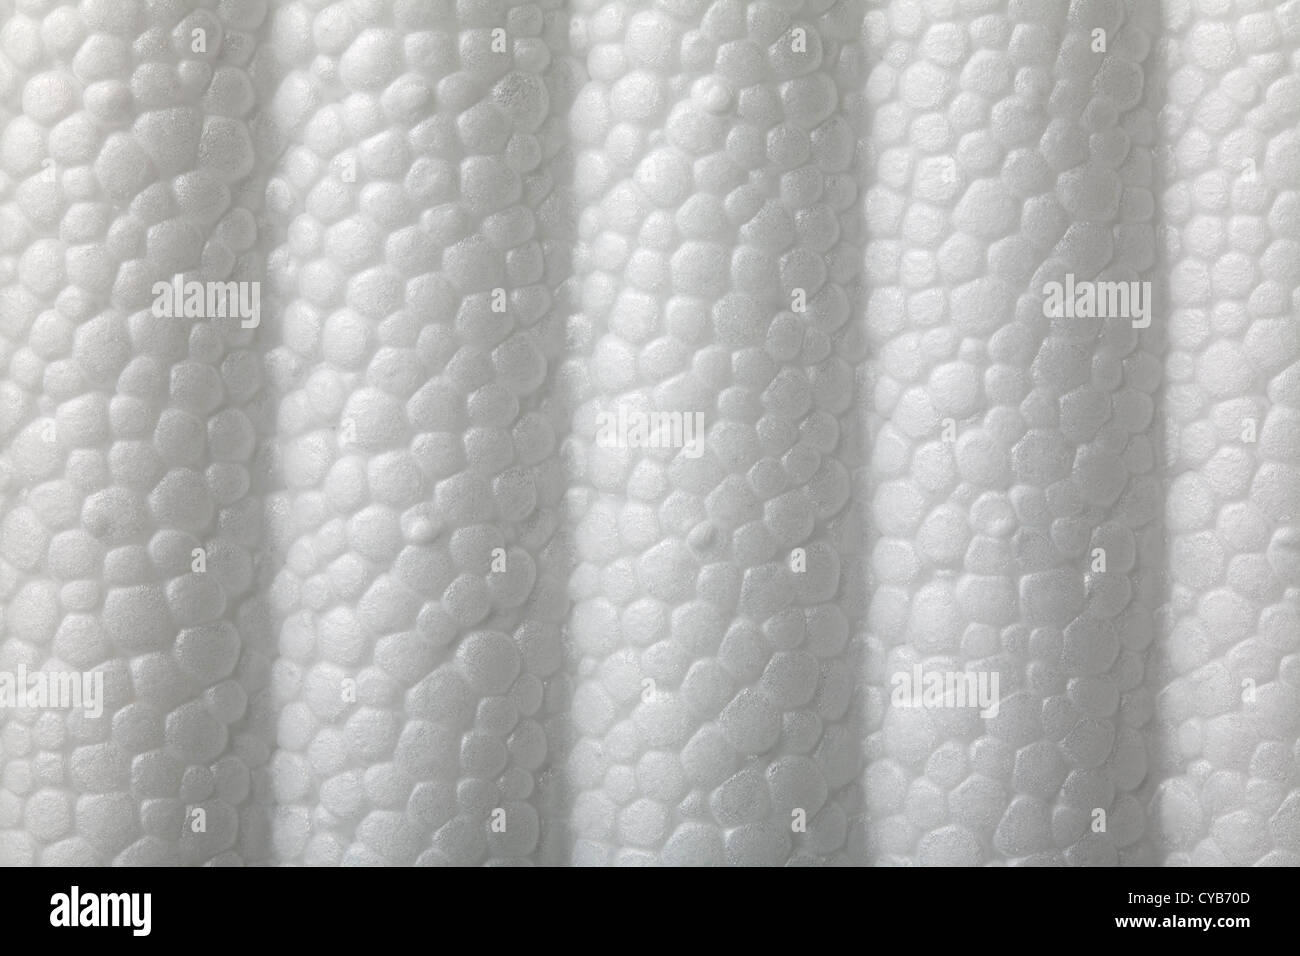 Close up of a white polystyrene foam surface as a background Stock Photo